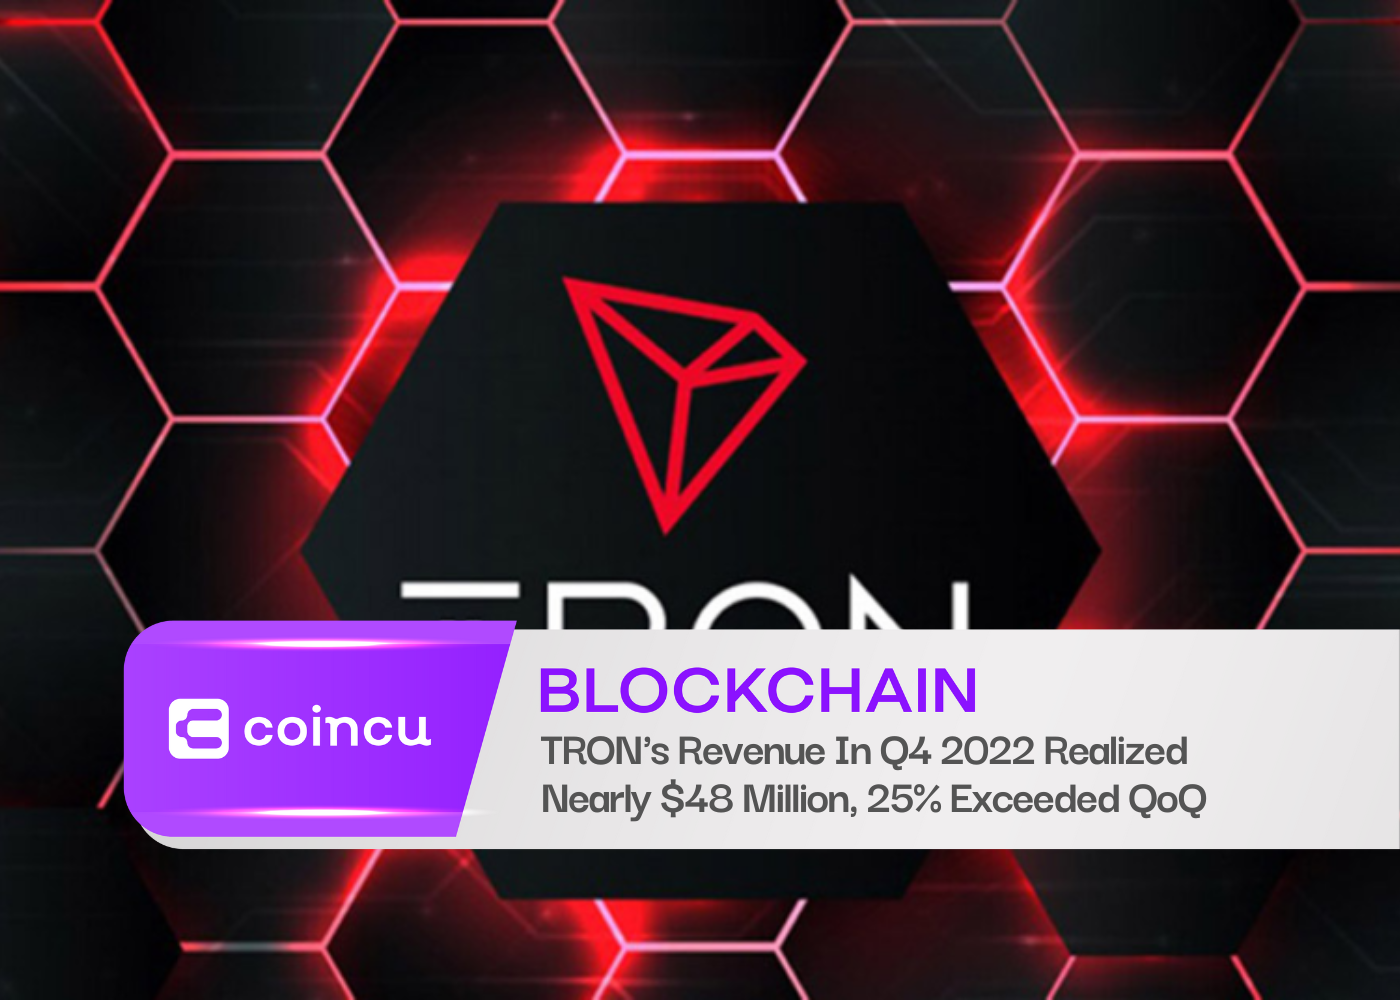 TRON's Revenue In Q4 2022 Realized Nearly $48 Million, 25% Exceeded QoQ